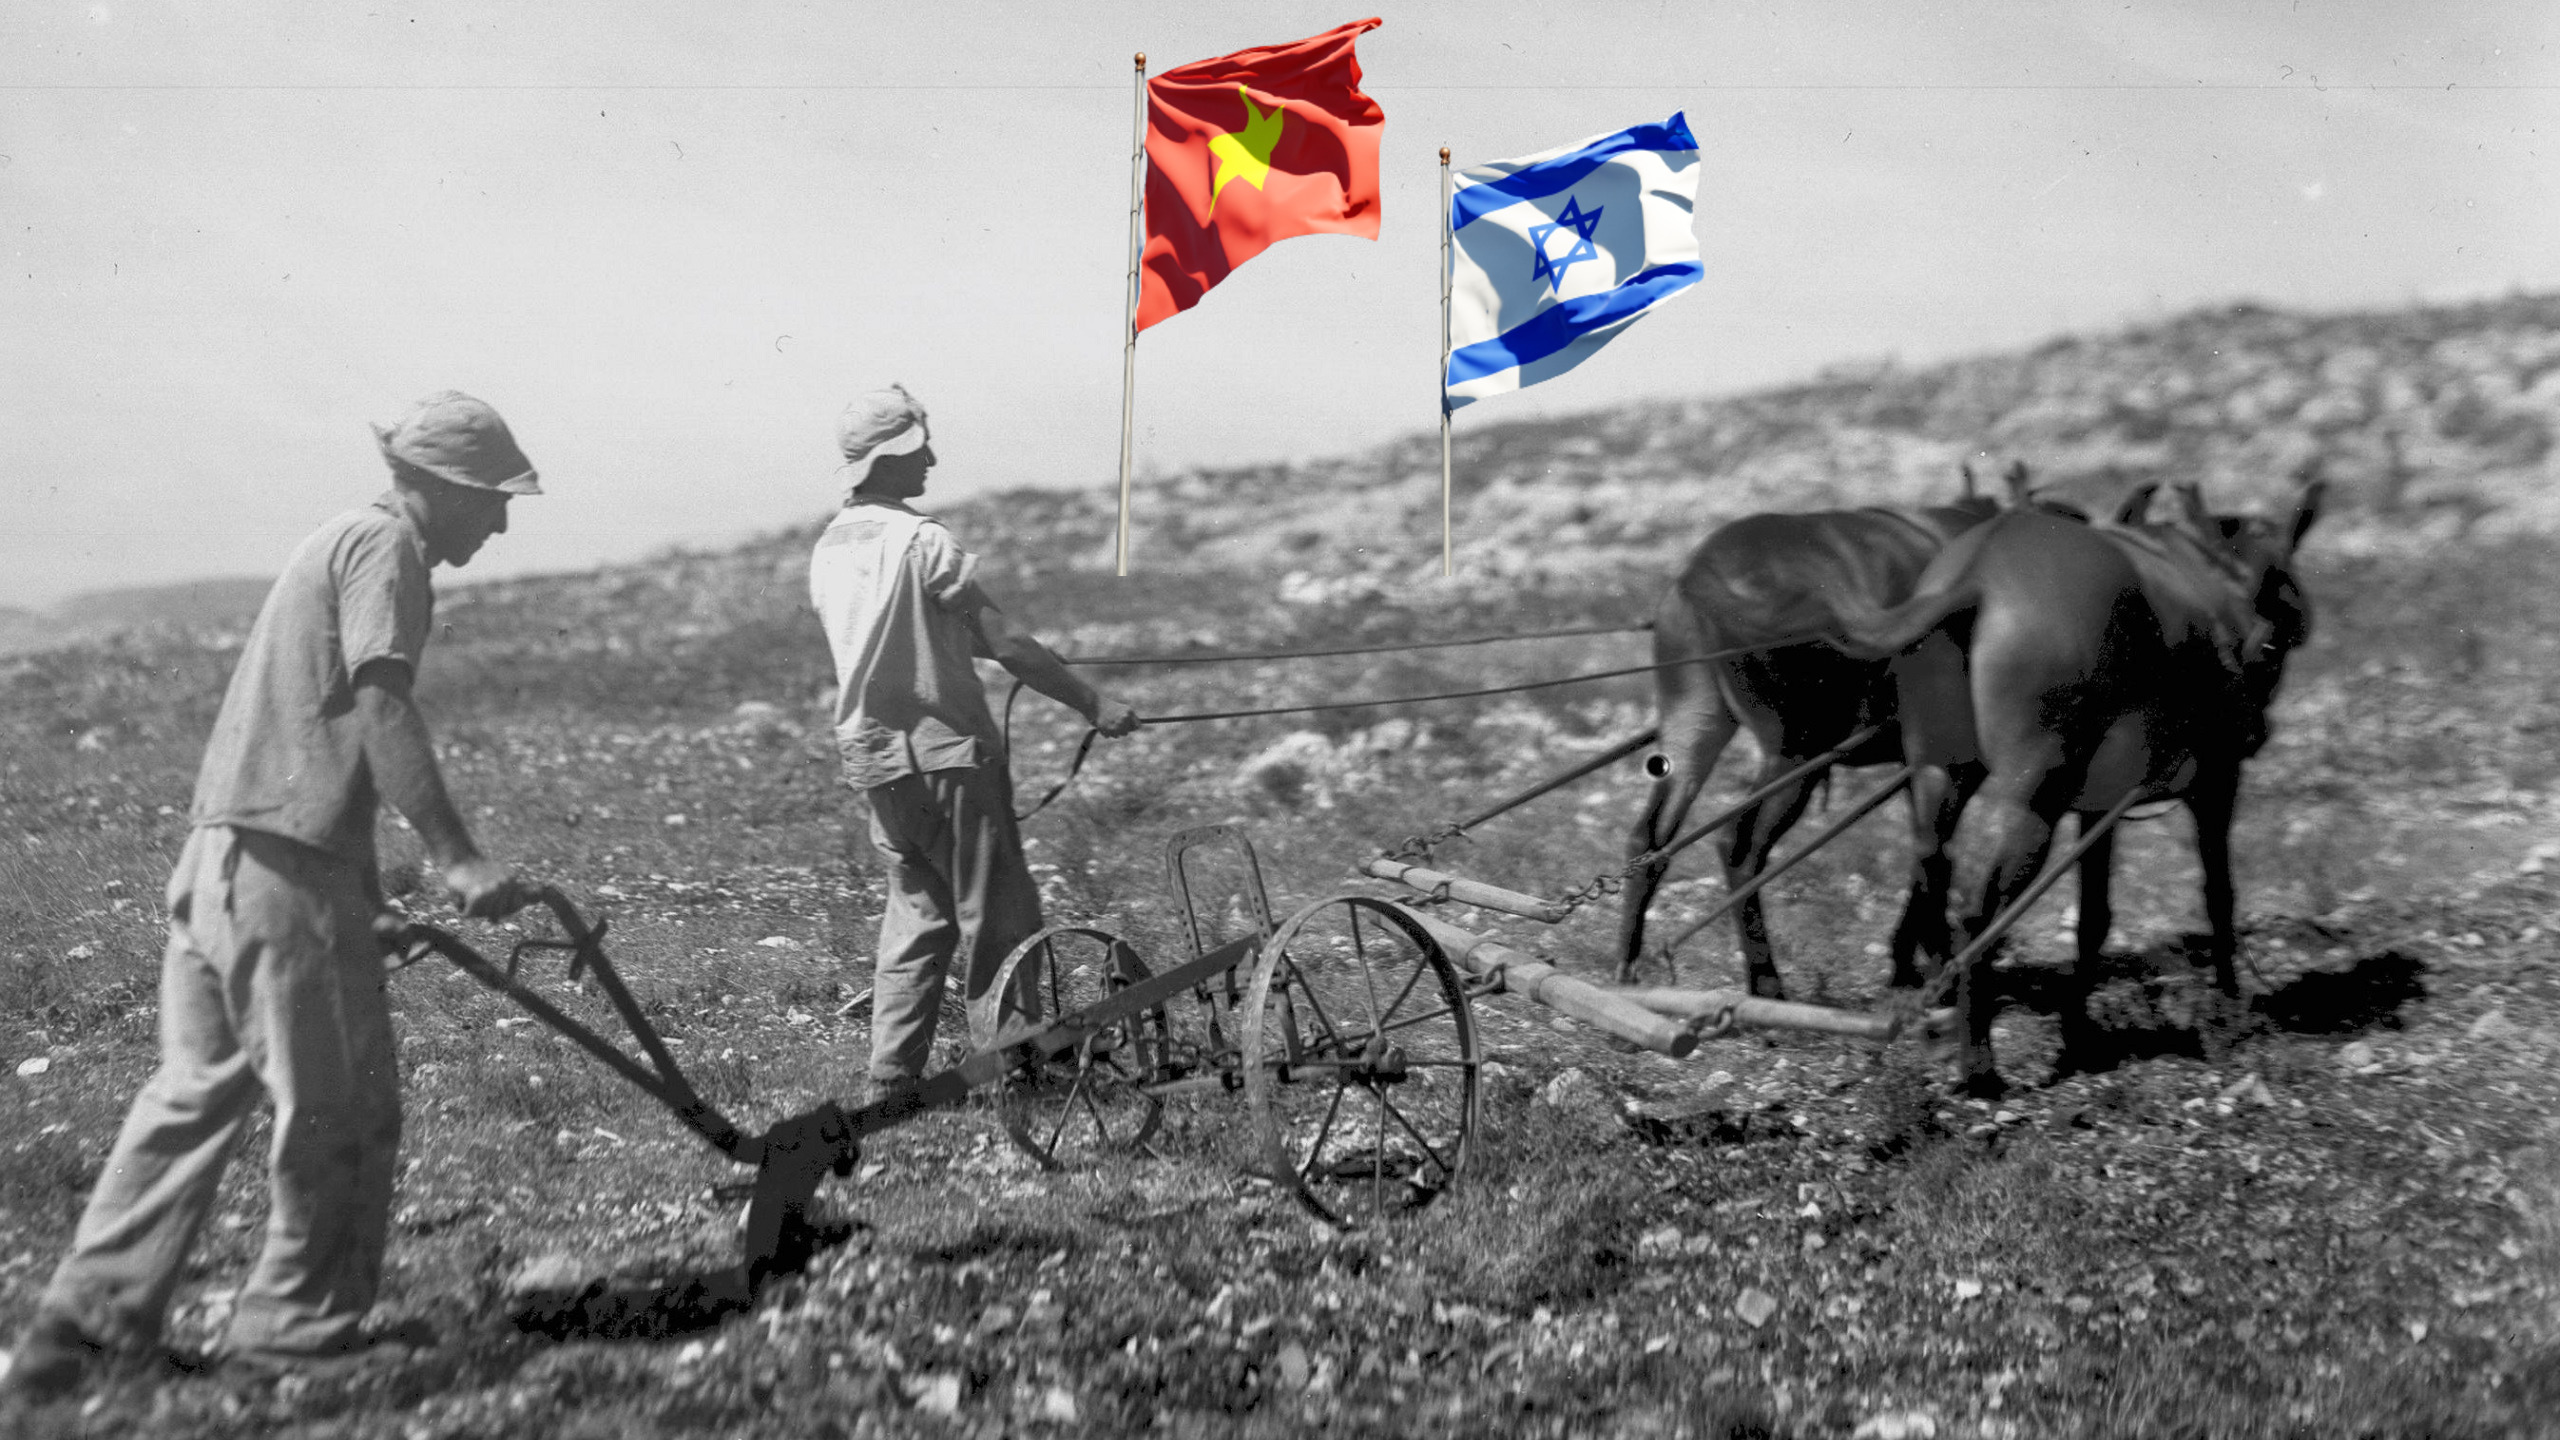 Vietnamese Delegation Visits Israel To Discuss Agricultural Cooperation, Learn About Successful Socialism